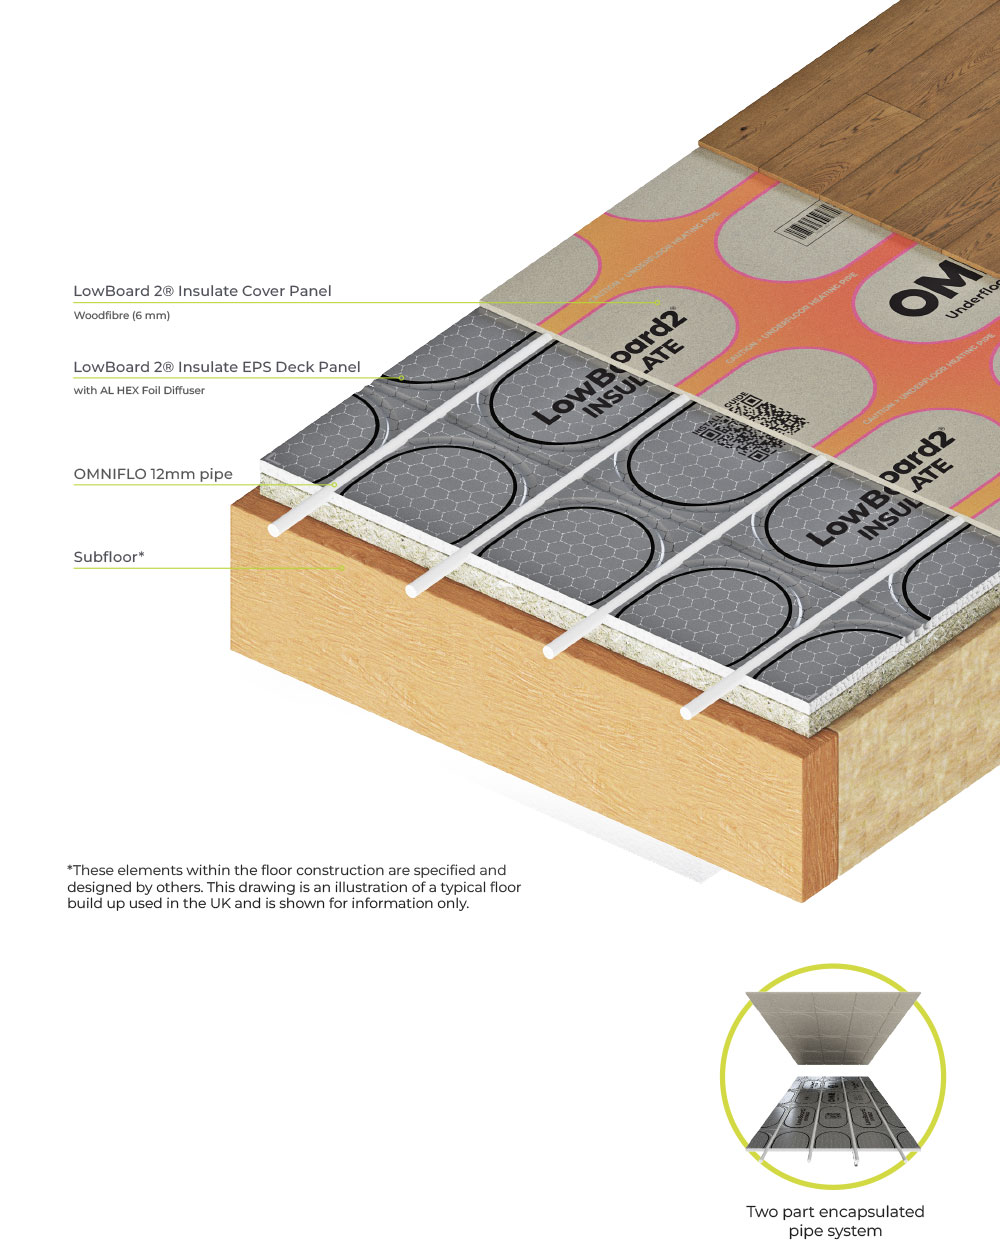 LowBoard 2® Insulate – for Low Build Up floors